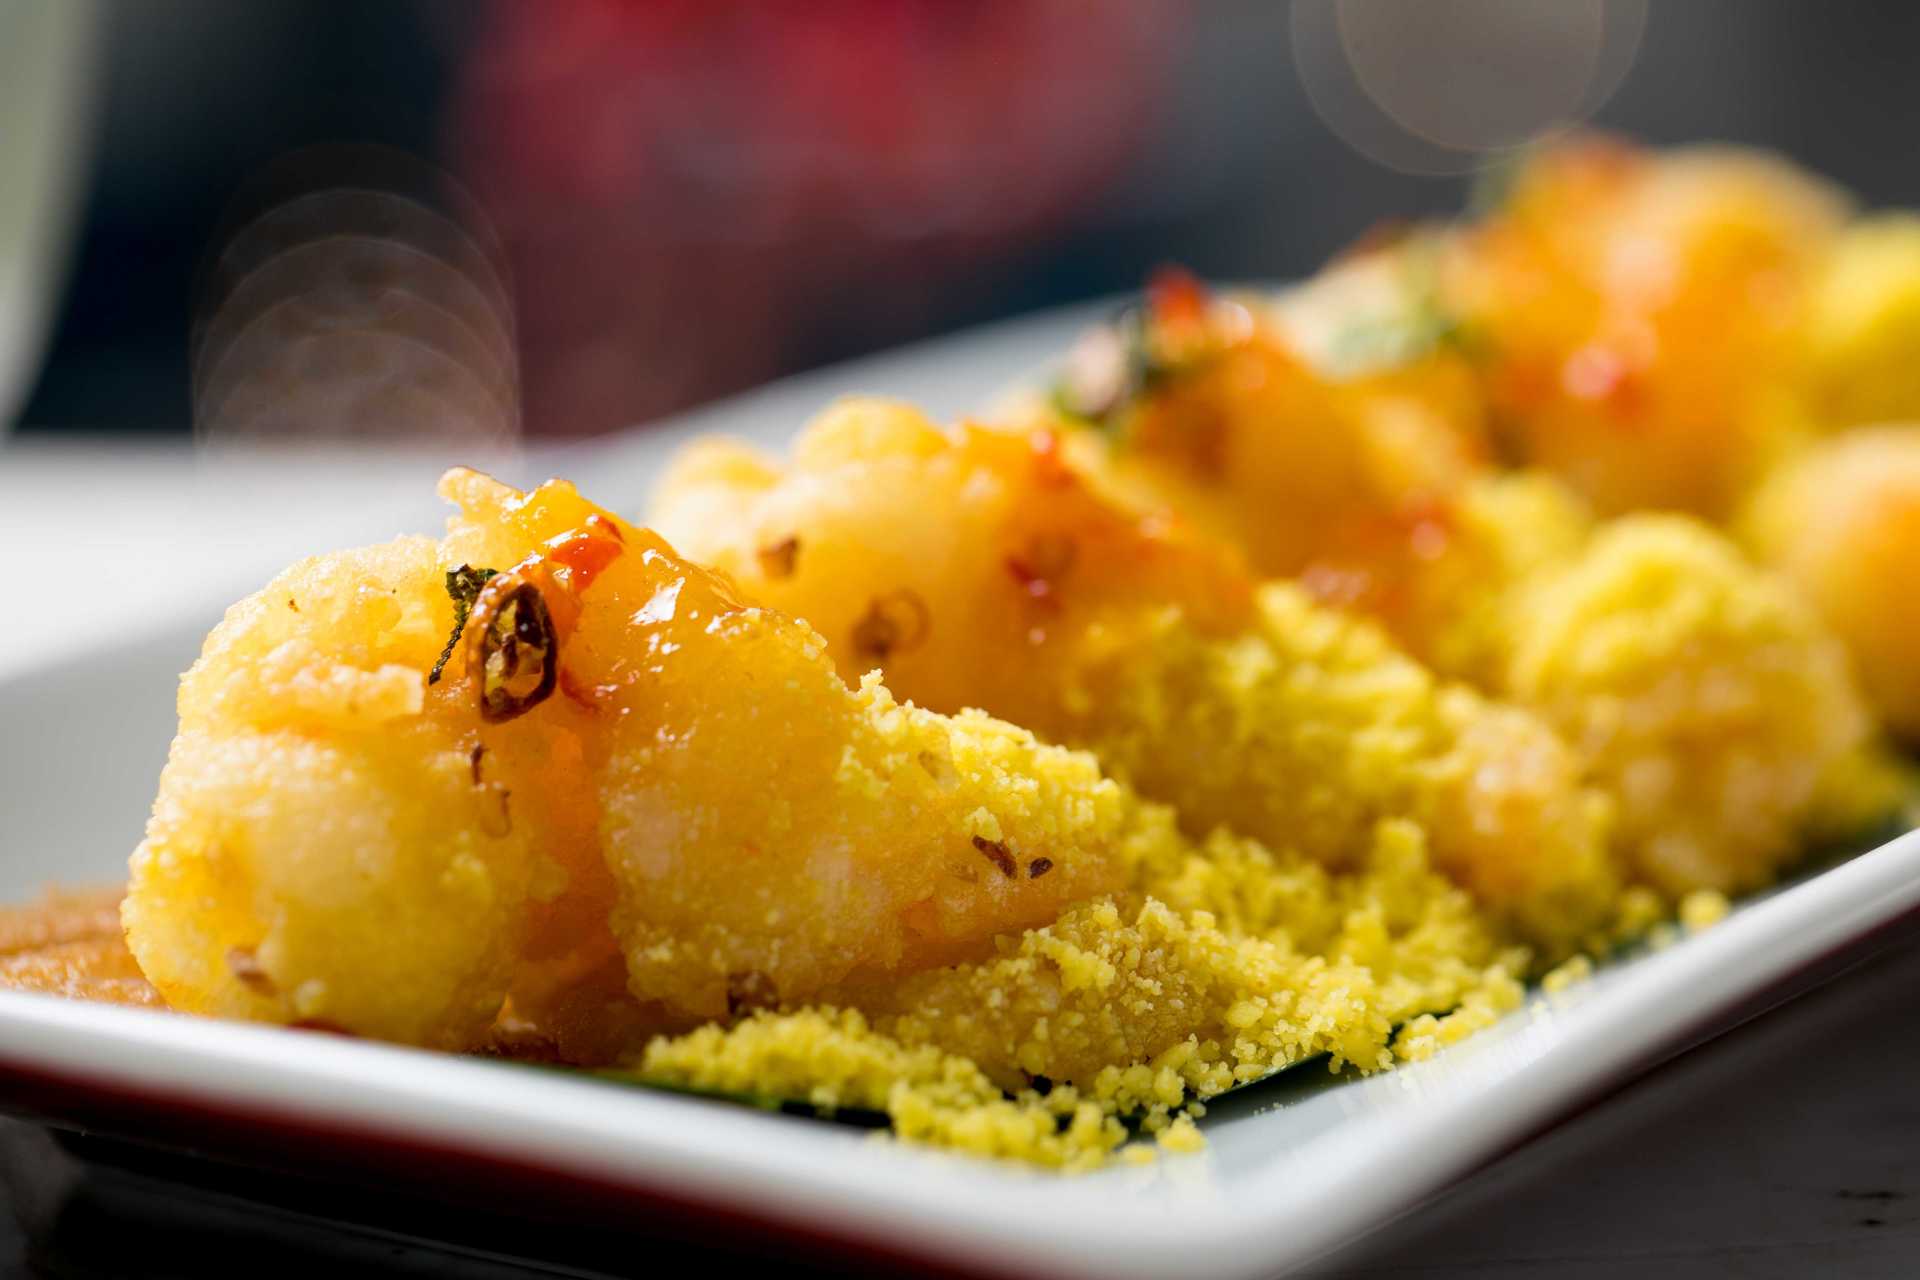 All Things Sassy - Golden fortune prawn in lime sauce 6